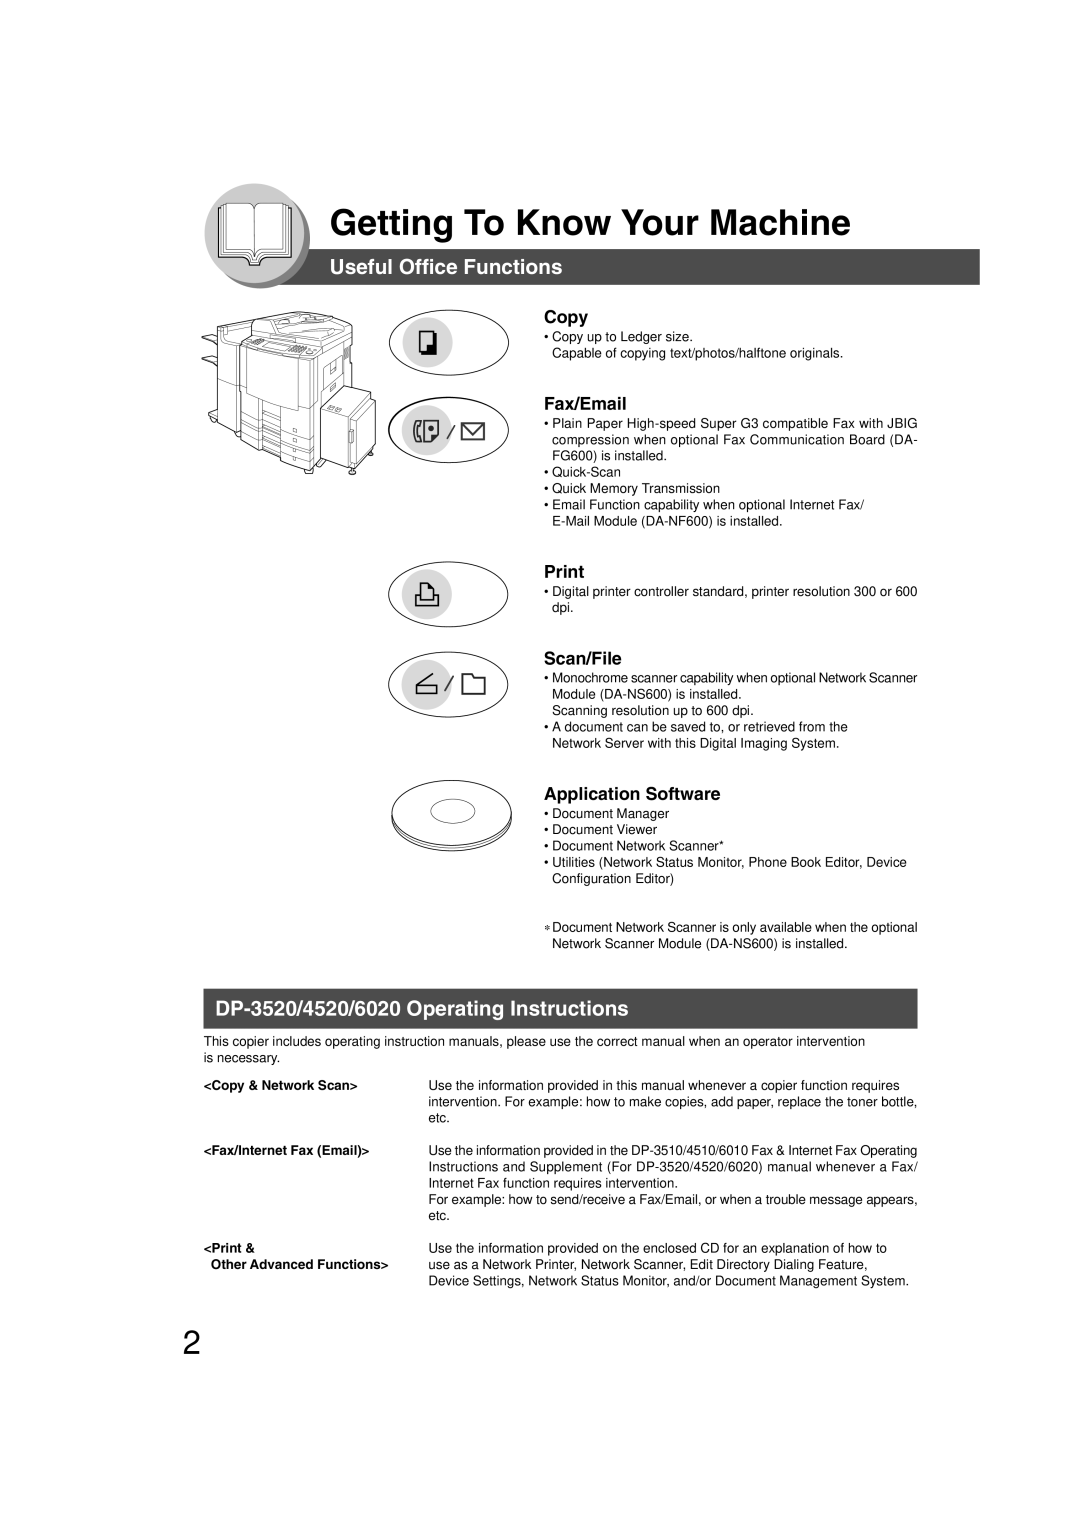 Panasonic Getting To Know Your Machine, Useful Office Functions, DP-3520/4520/6020 Operating Instructions, Copy, Print 